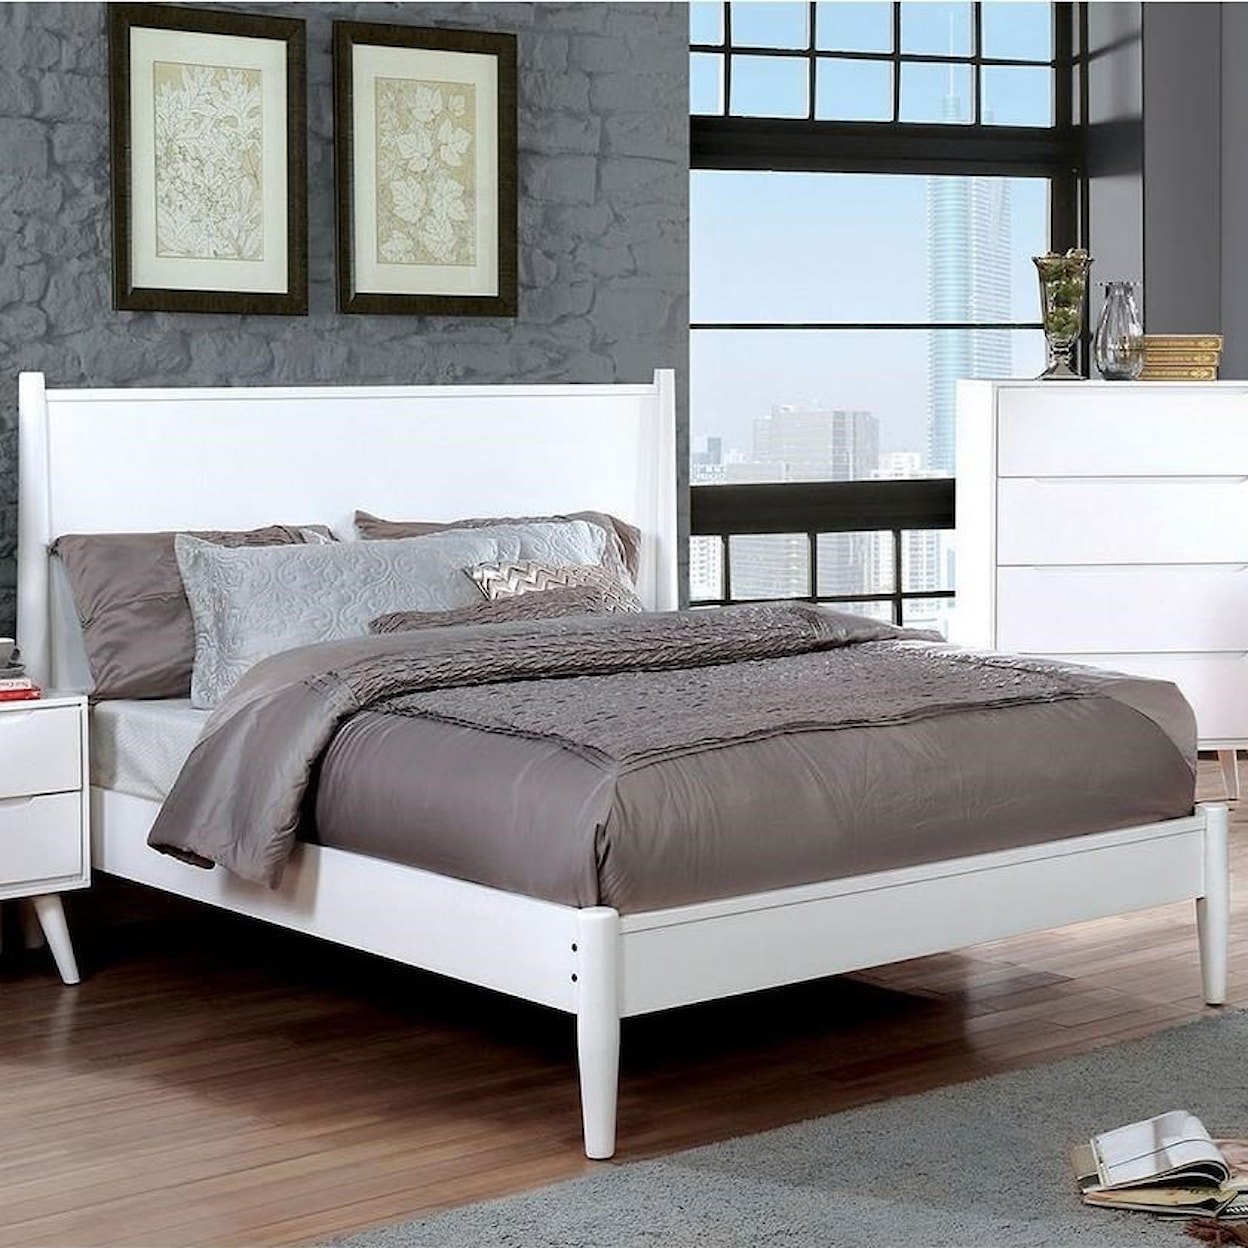 Furniture of America Lennart Queen Bed